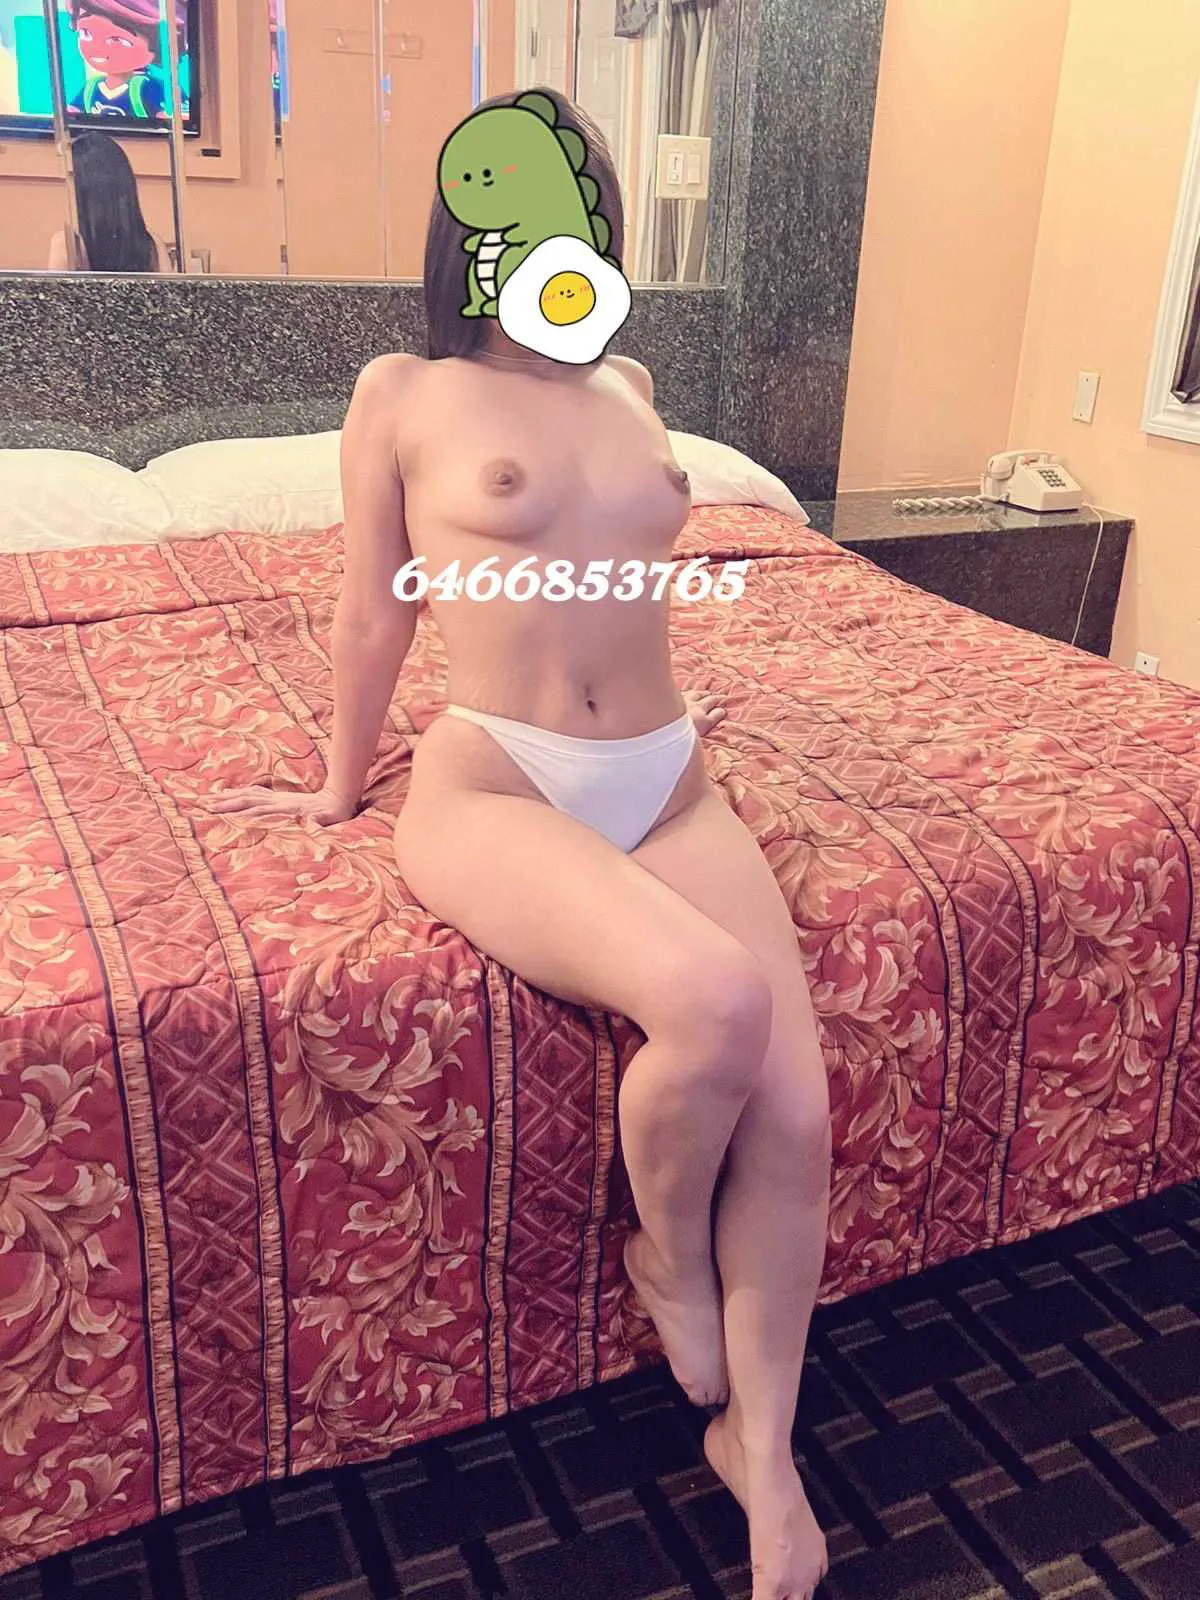 Reviews about escort with phone number 6466853766